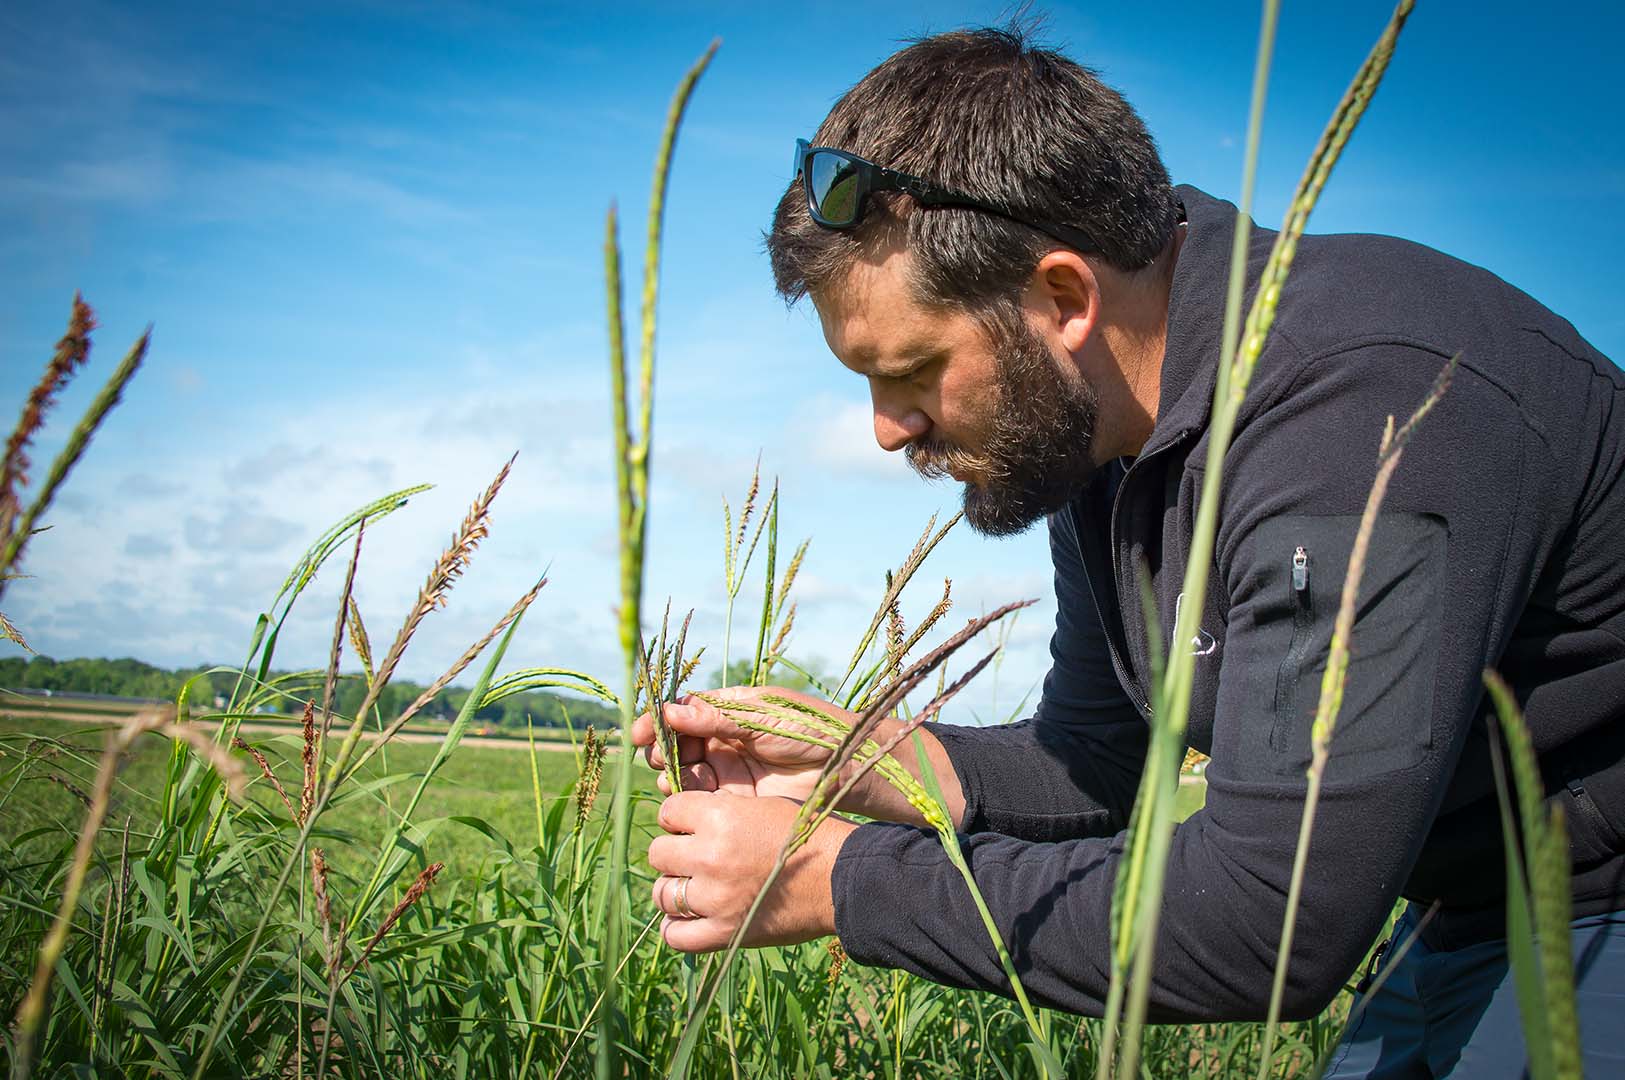 Dr. Jesse Morrison examines Eastern gamagrass at the R. R. Foil Plant Science Research Center in Starkville, Mississippi. (Photo by David Ammon)